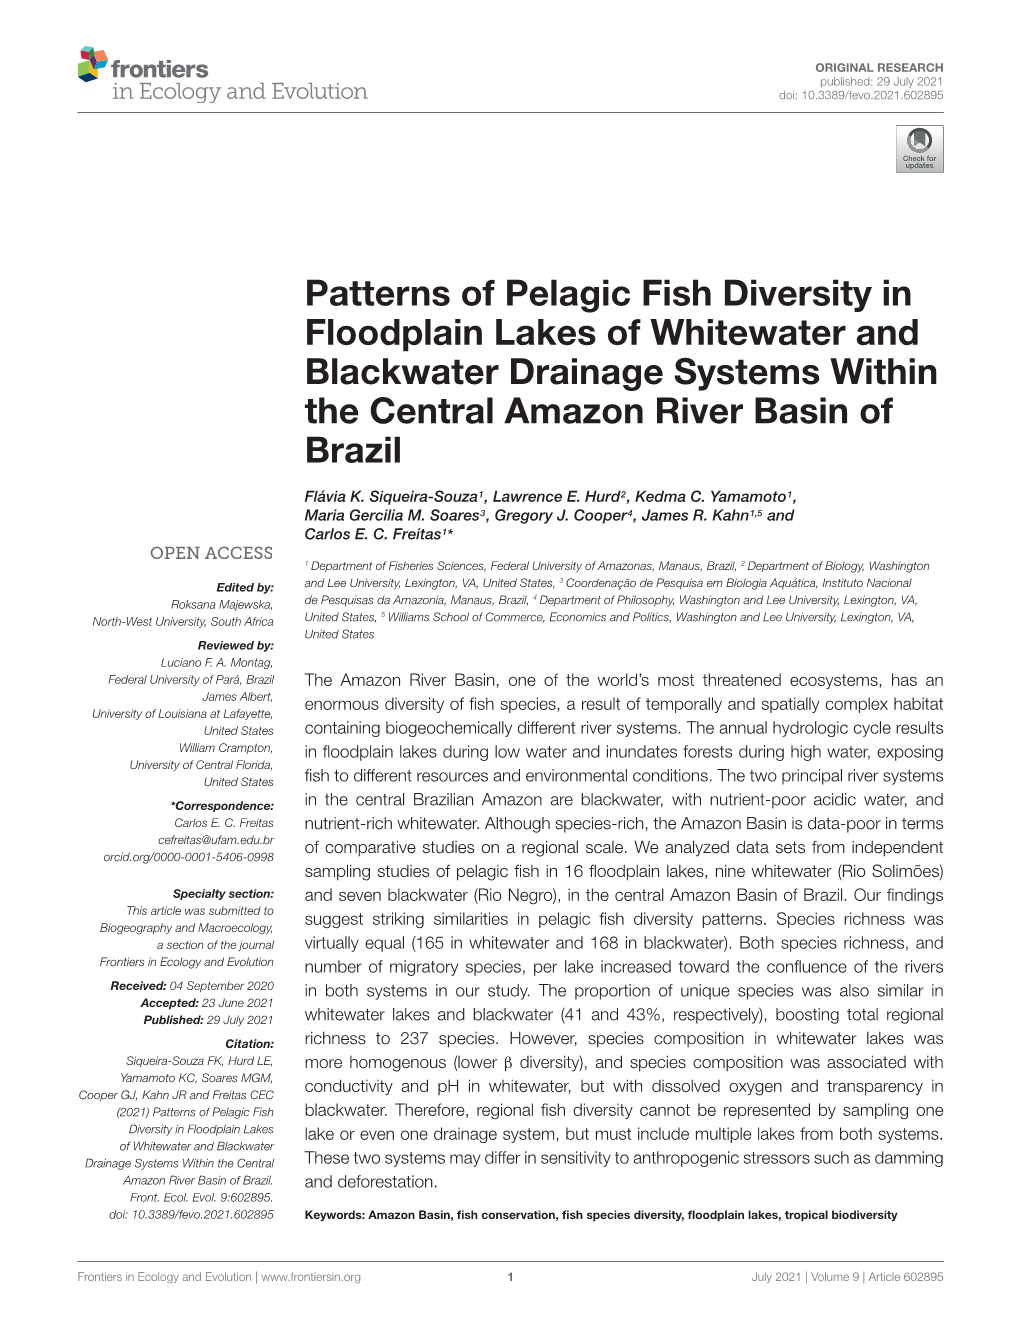 Patterns of Pelagic Fish Diversity in Floodplain Lakes of Whitewater and Blackwater Drainage Systems Within the Central Amazon River Basin of Brazil